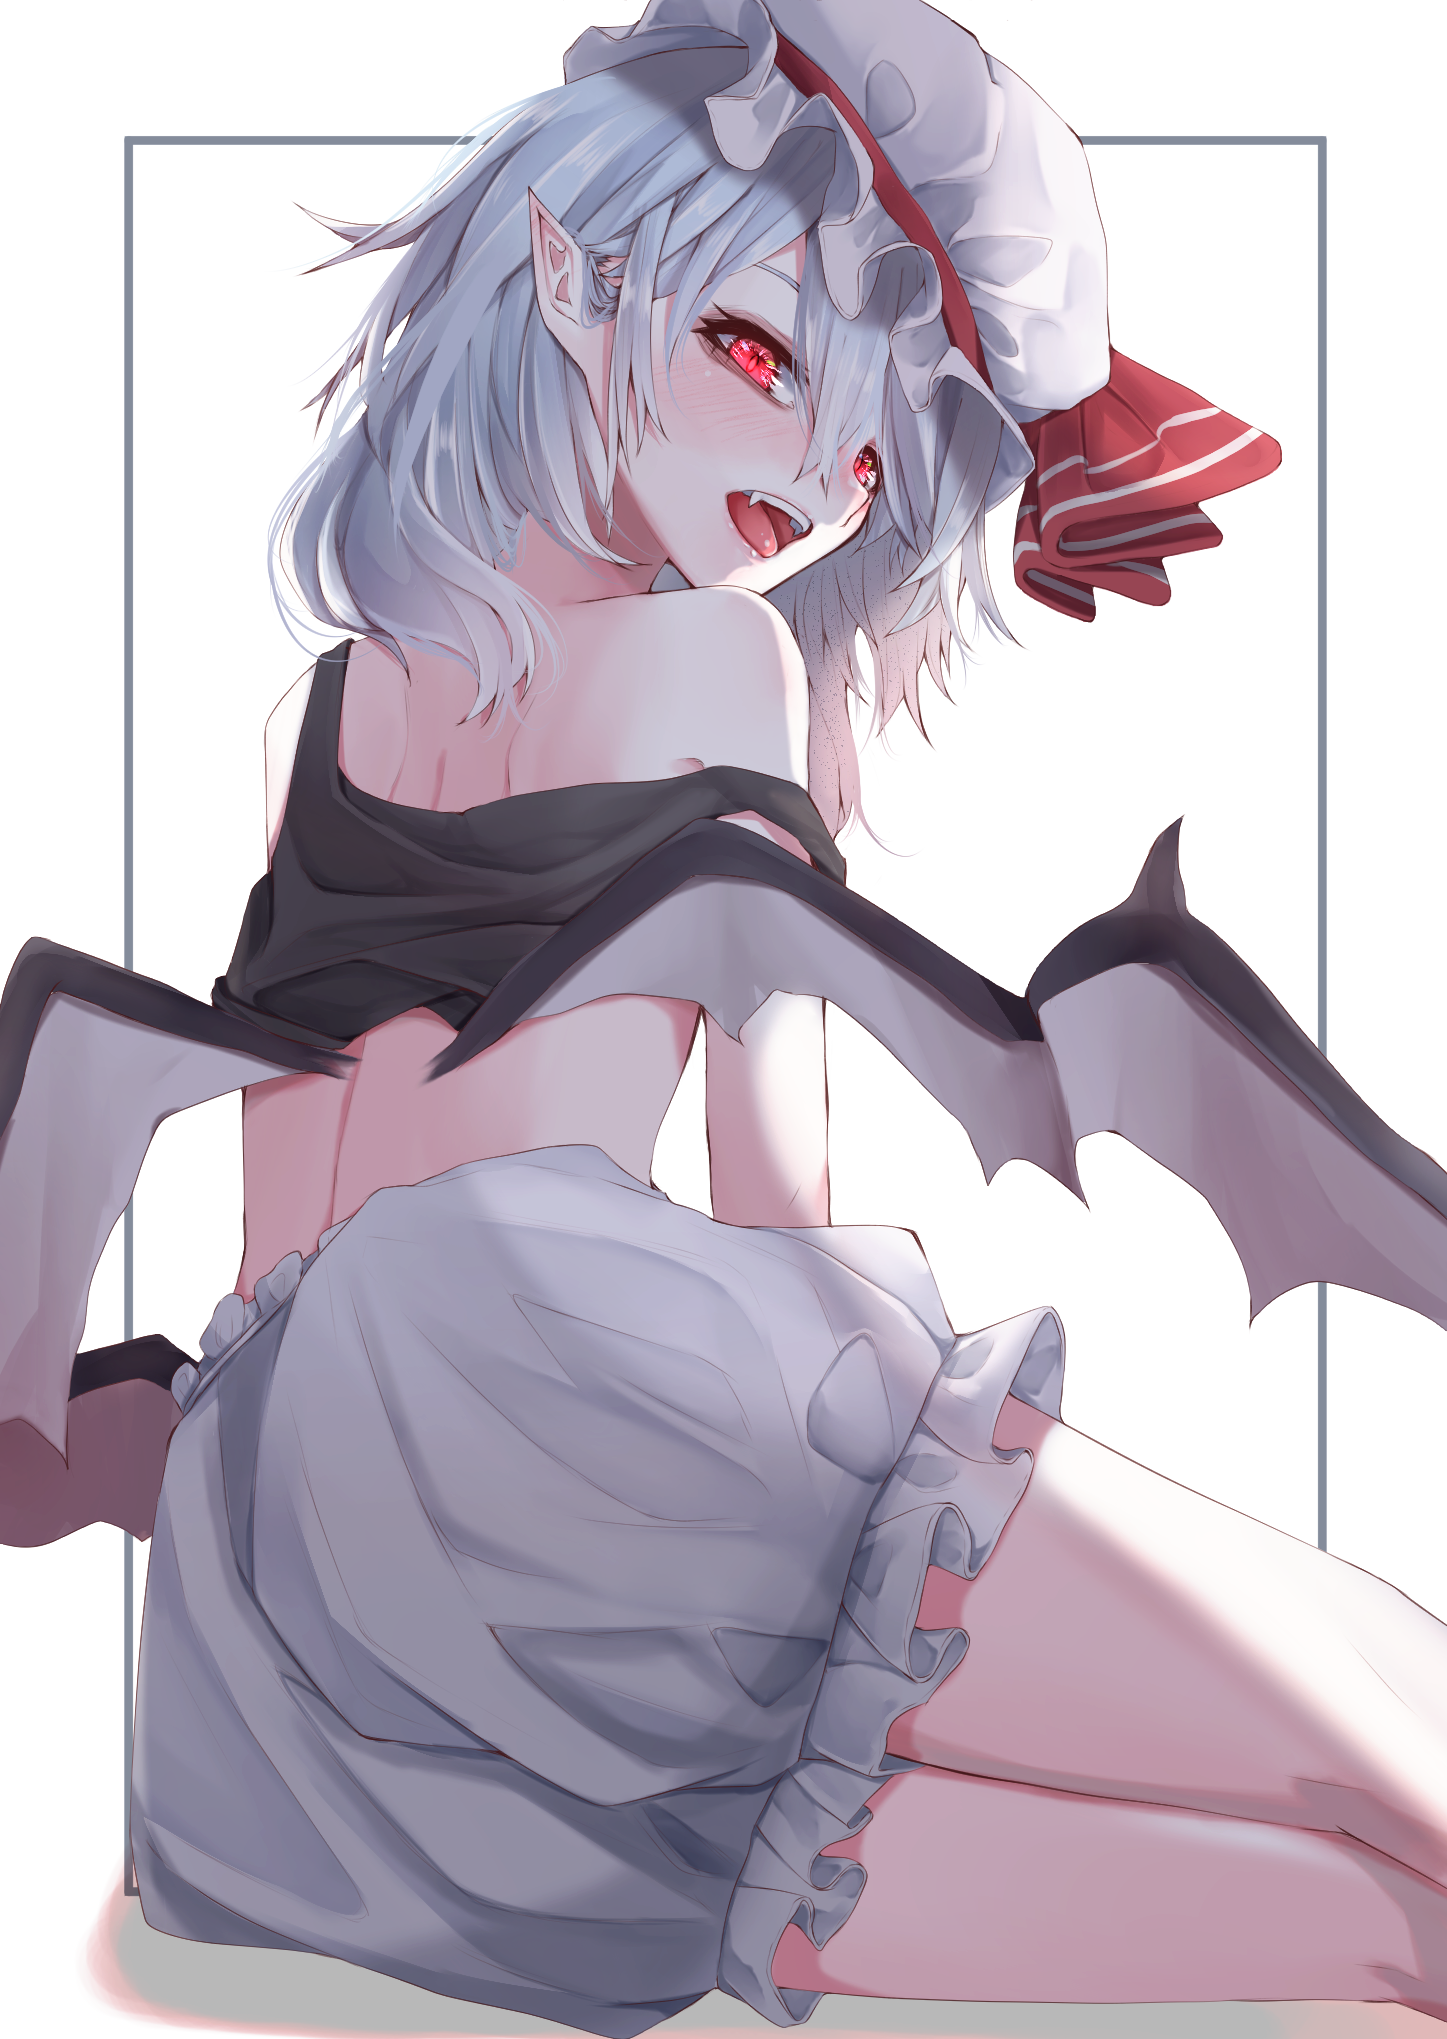 Anime 1447x2039 anime anime girls digital art artwork 2D portrait display Touhou Remilia Scarlet Fall Dommmmmer wings pointy ears red eyes